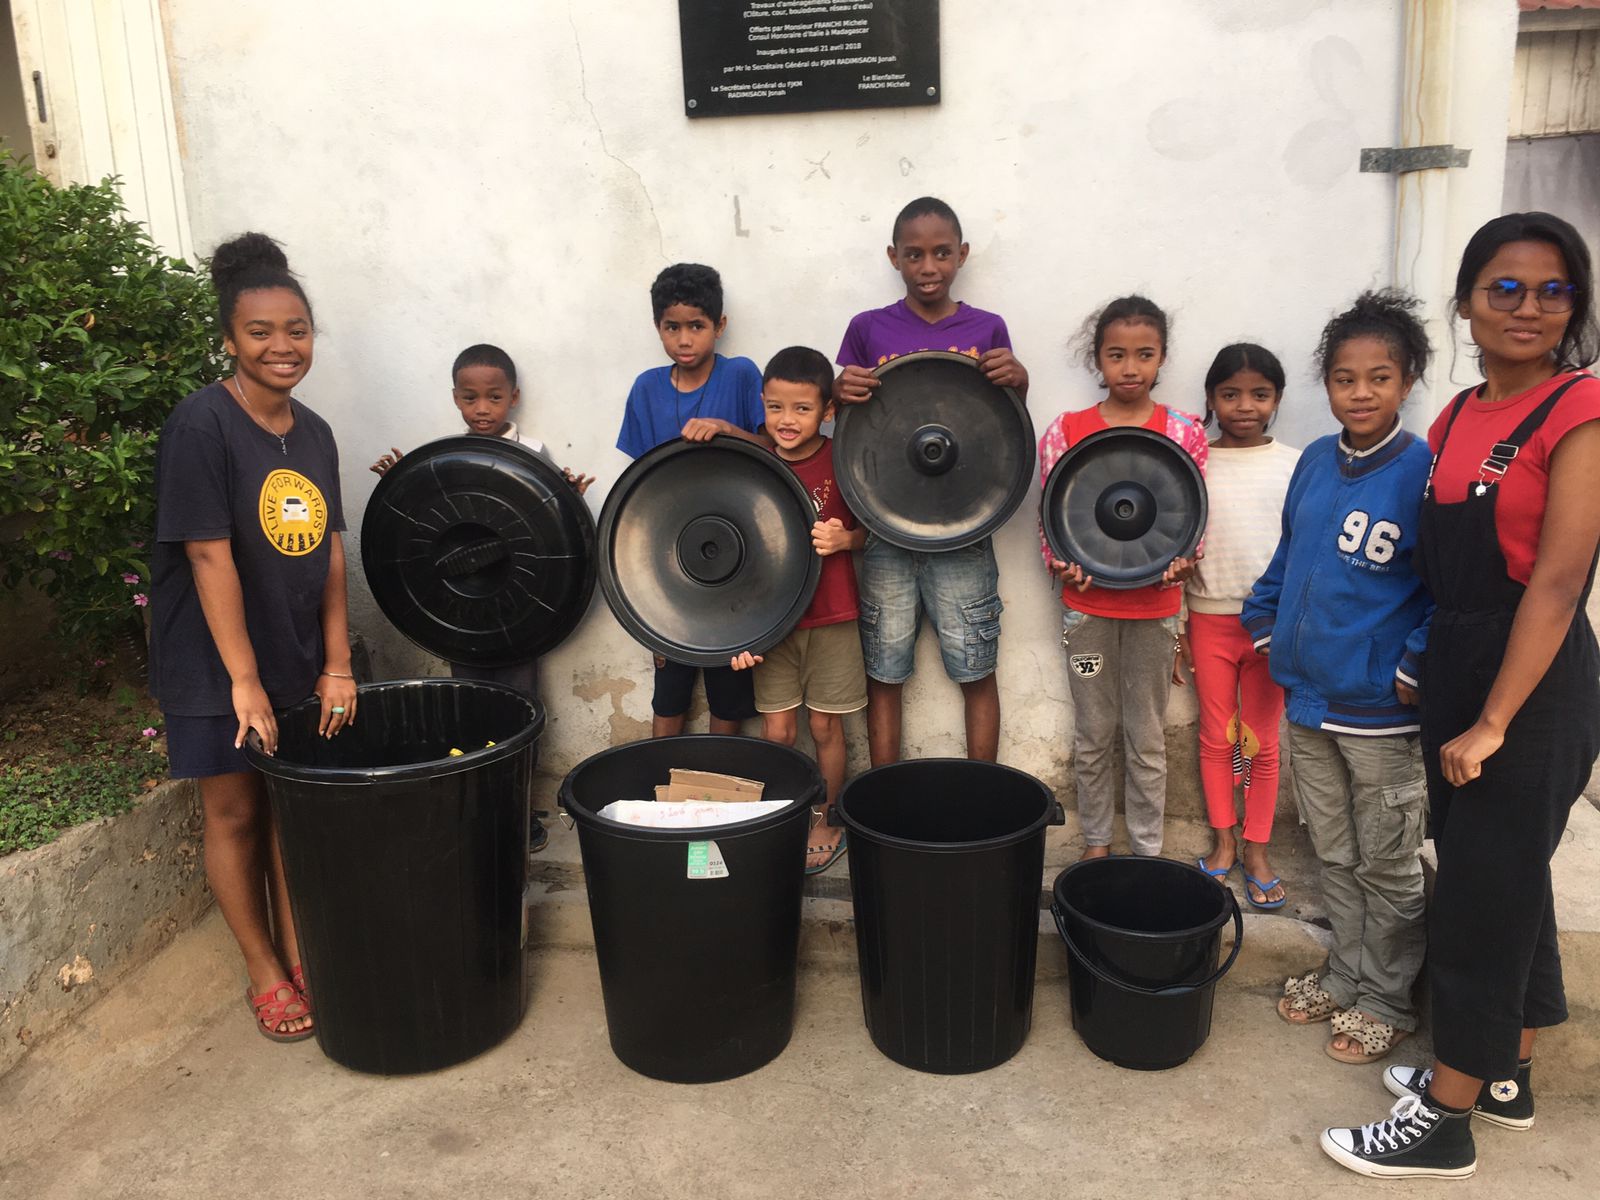 Social project: waste sorting